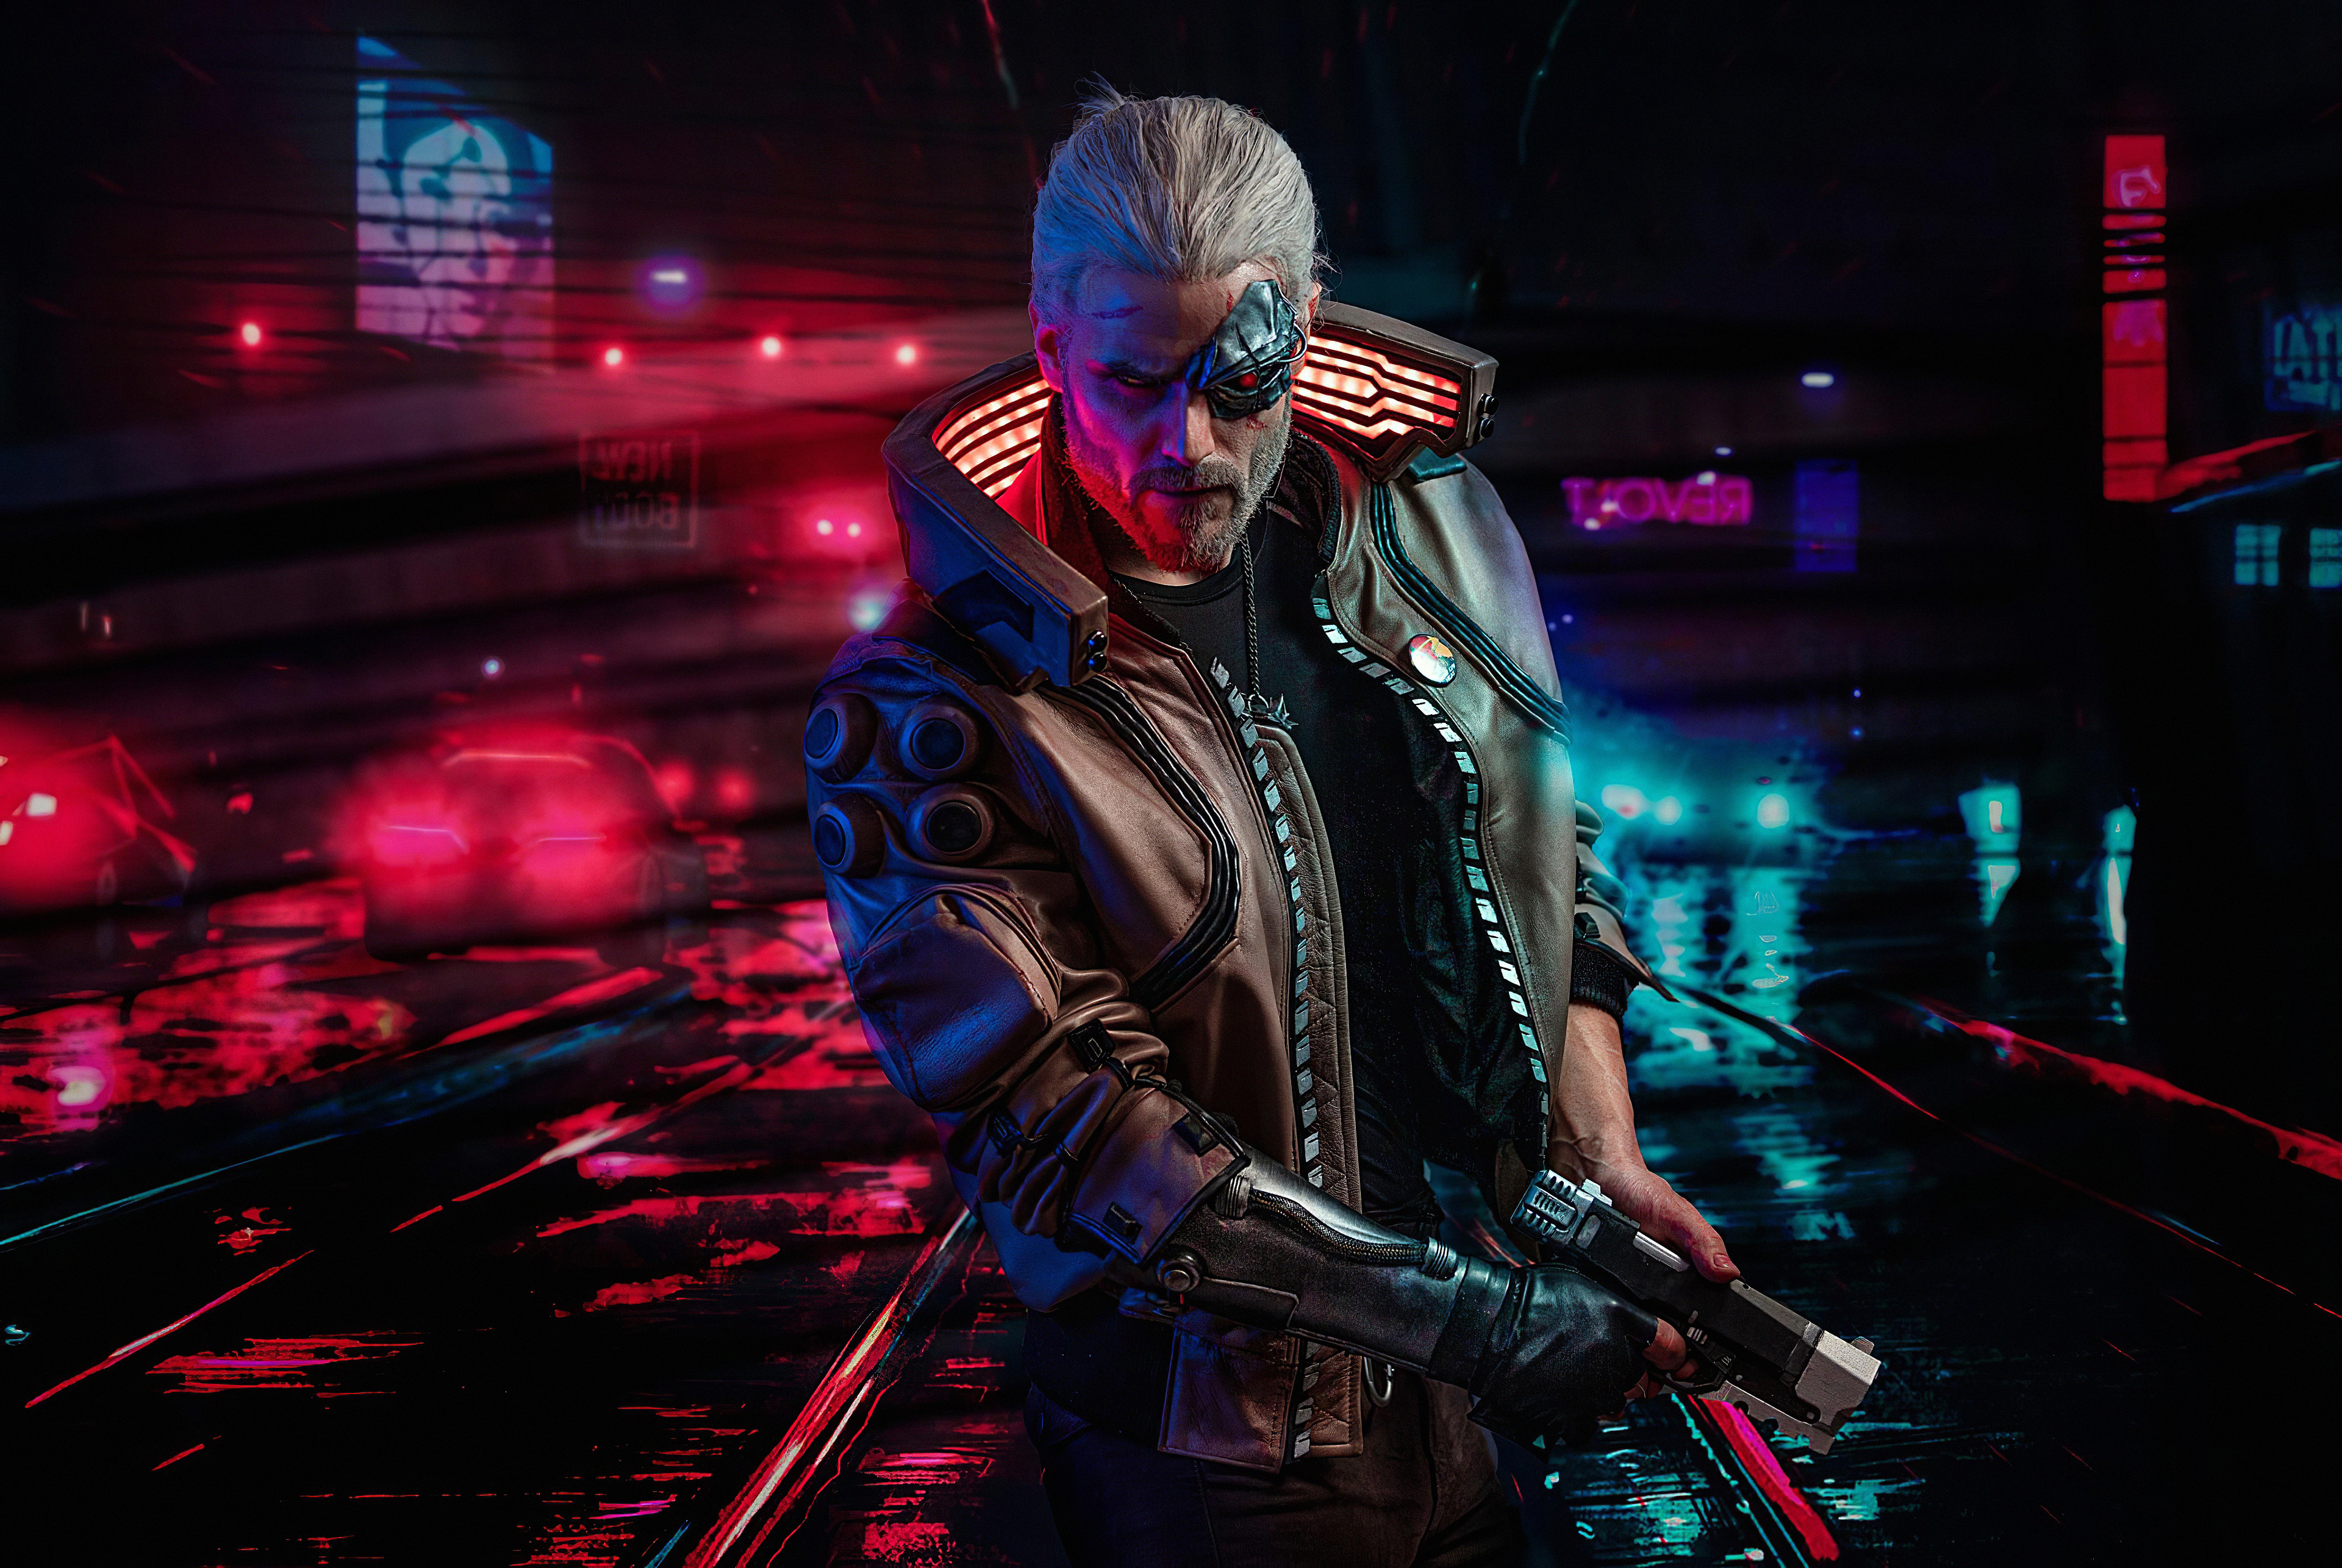 540x Witcher Cyberpunk 77 540x Resolution Wallpaper Hd Games 4k Wallpapers Images Photos And Background Wallpapers Den